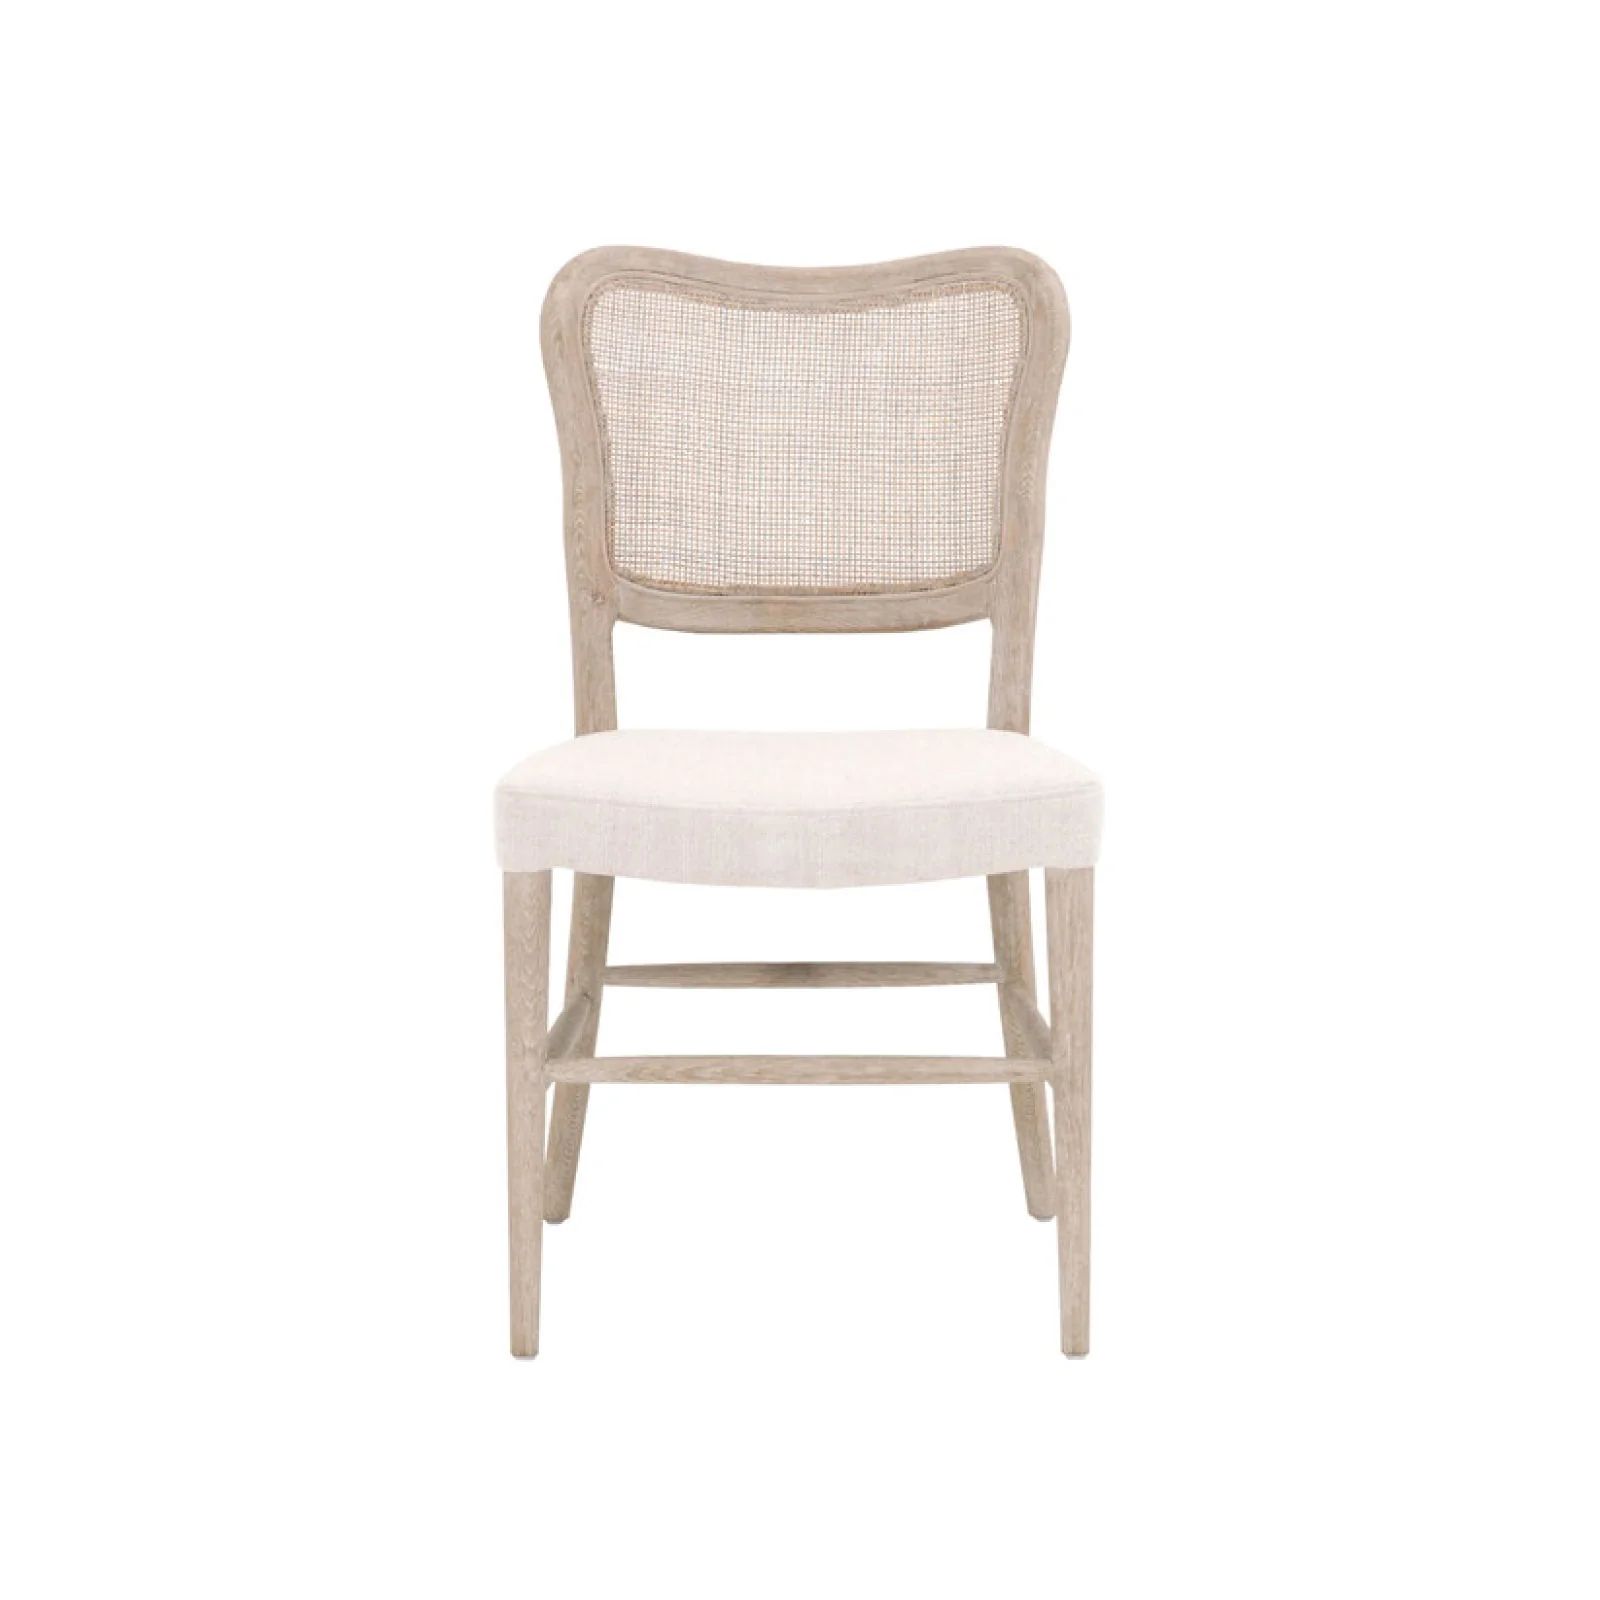 Celine Dining Chair | Brooke and Lou